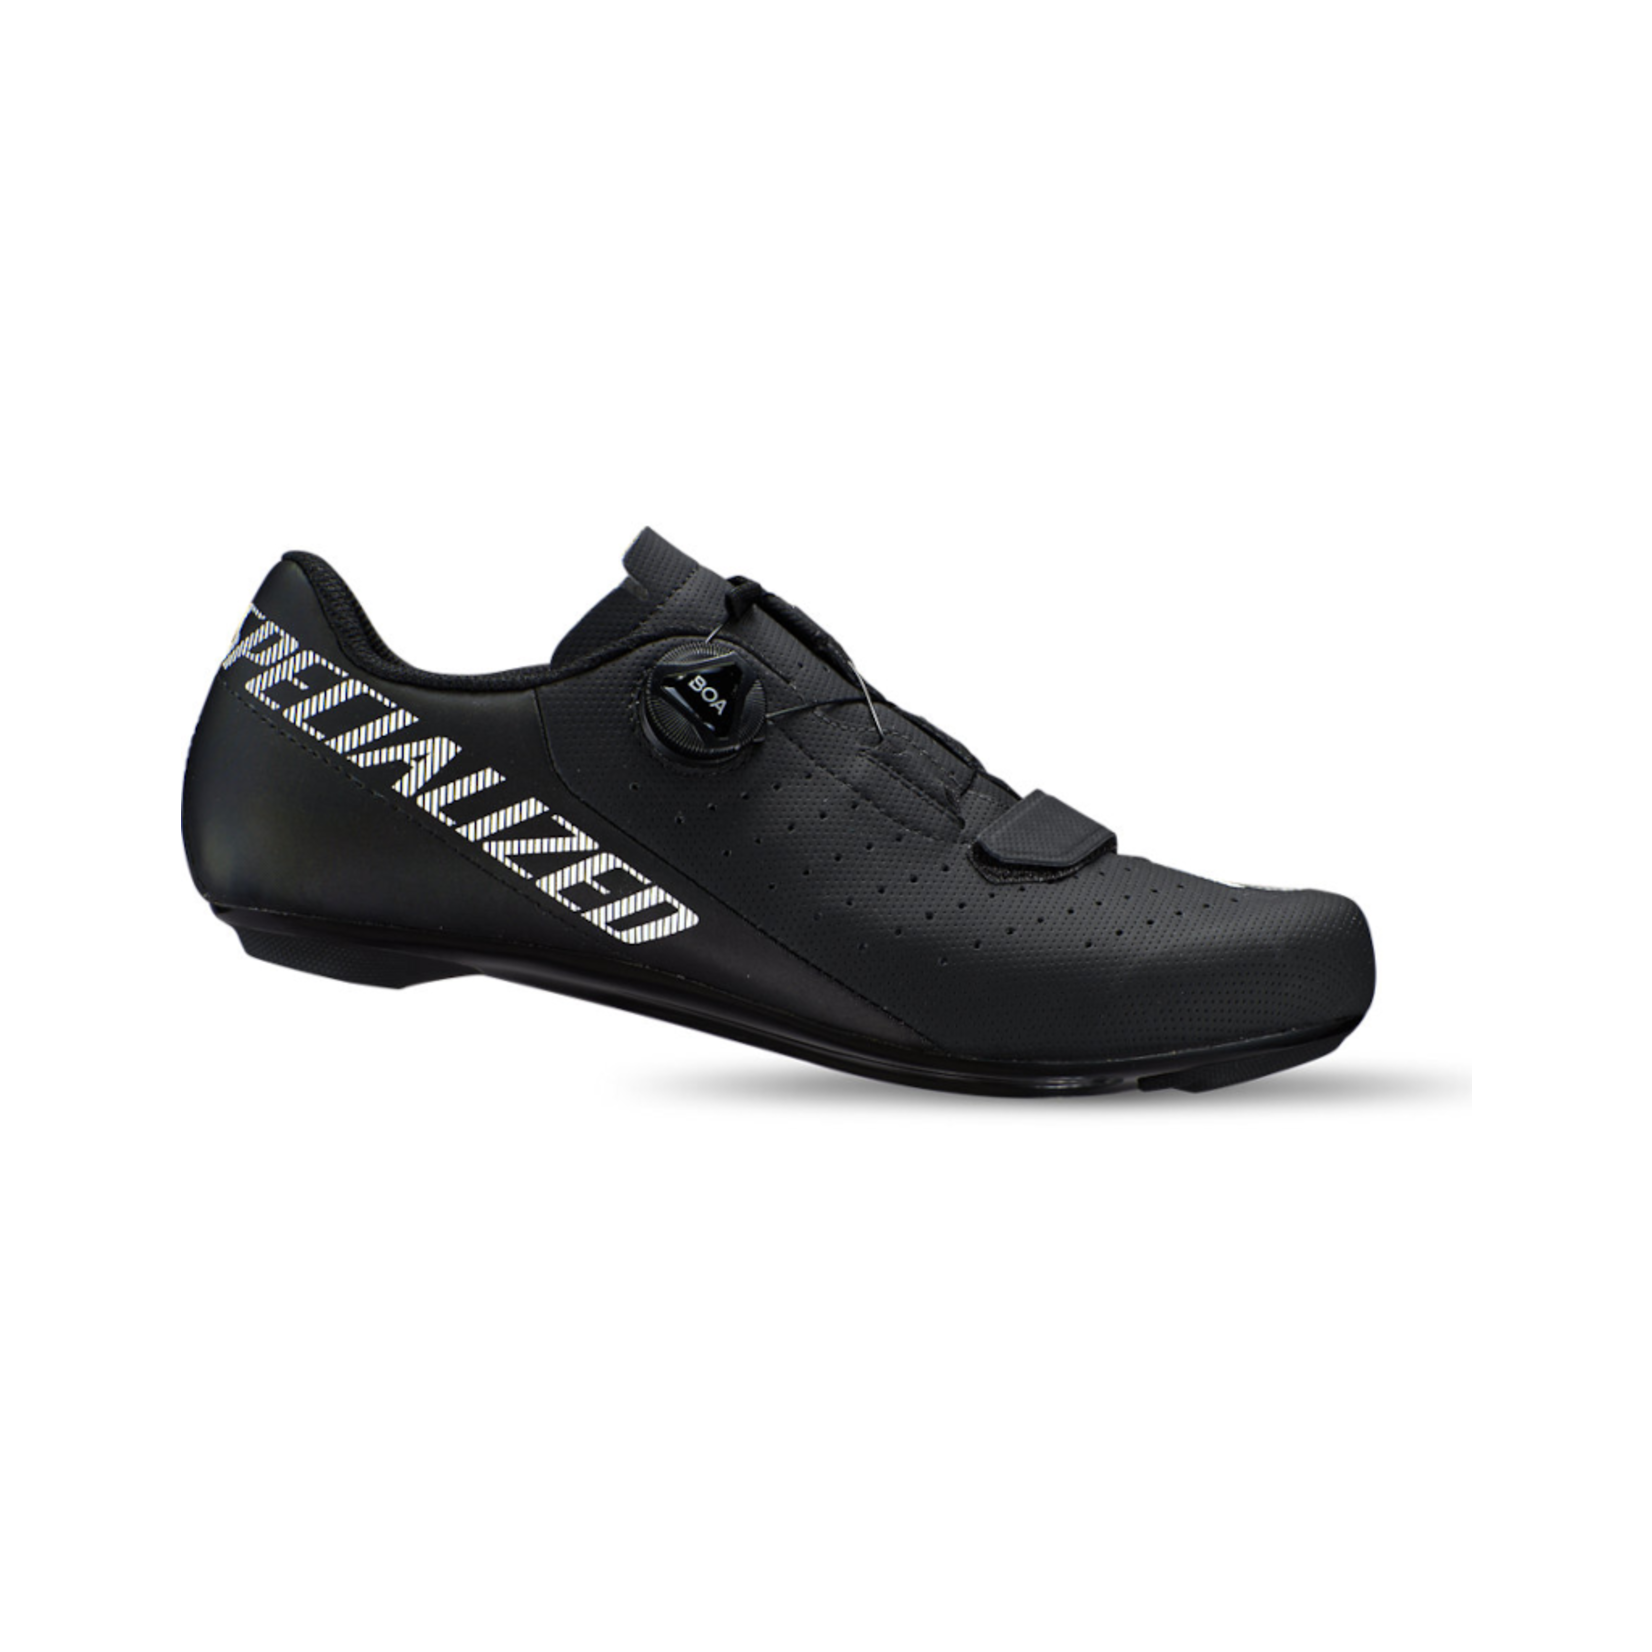 Specialized Torch 1.0 Road Cycling Shoe